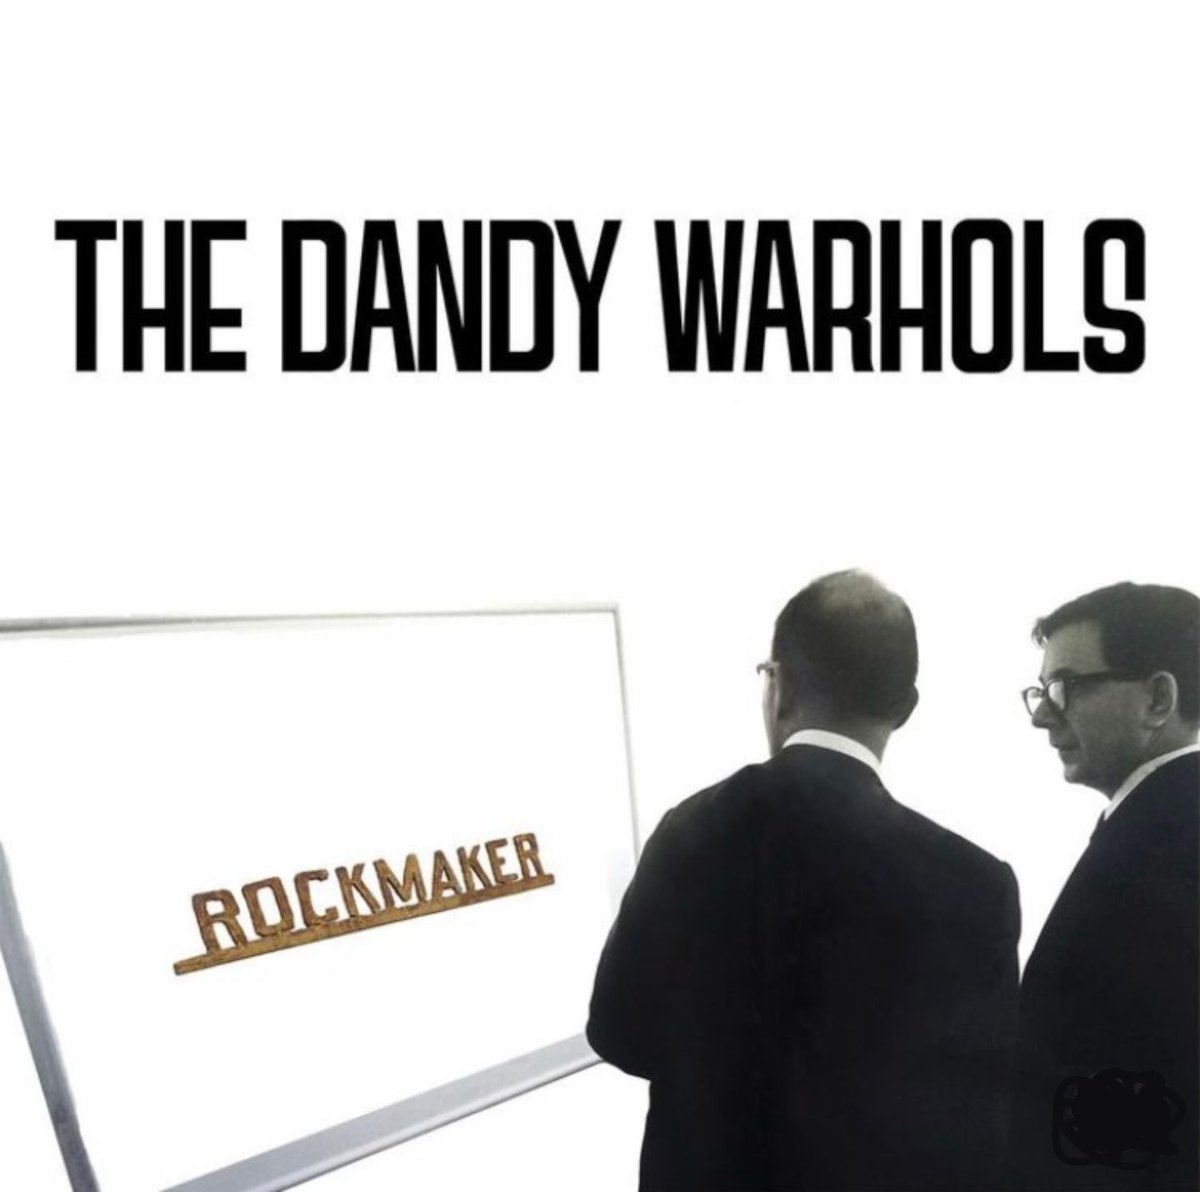 ITS FINALLY HERE! I happy to say the album ROCKMAKER by @TheDandyWarhols is out now! Mixed by me and featuring an all star line up including #debbieharry #slash #blackfrancis . The album is pure 🔥 & it was great fun working on it. Go buy / stream & Play it LOUD!